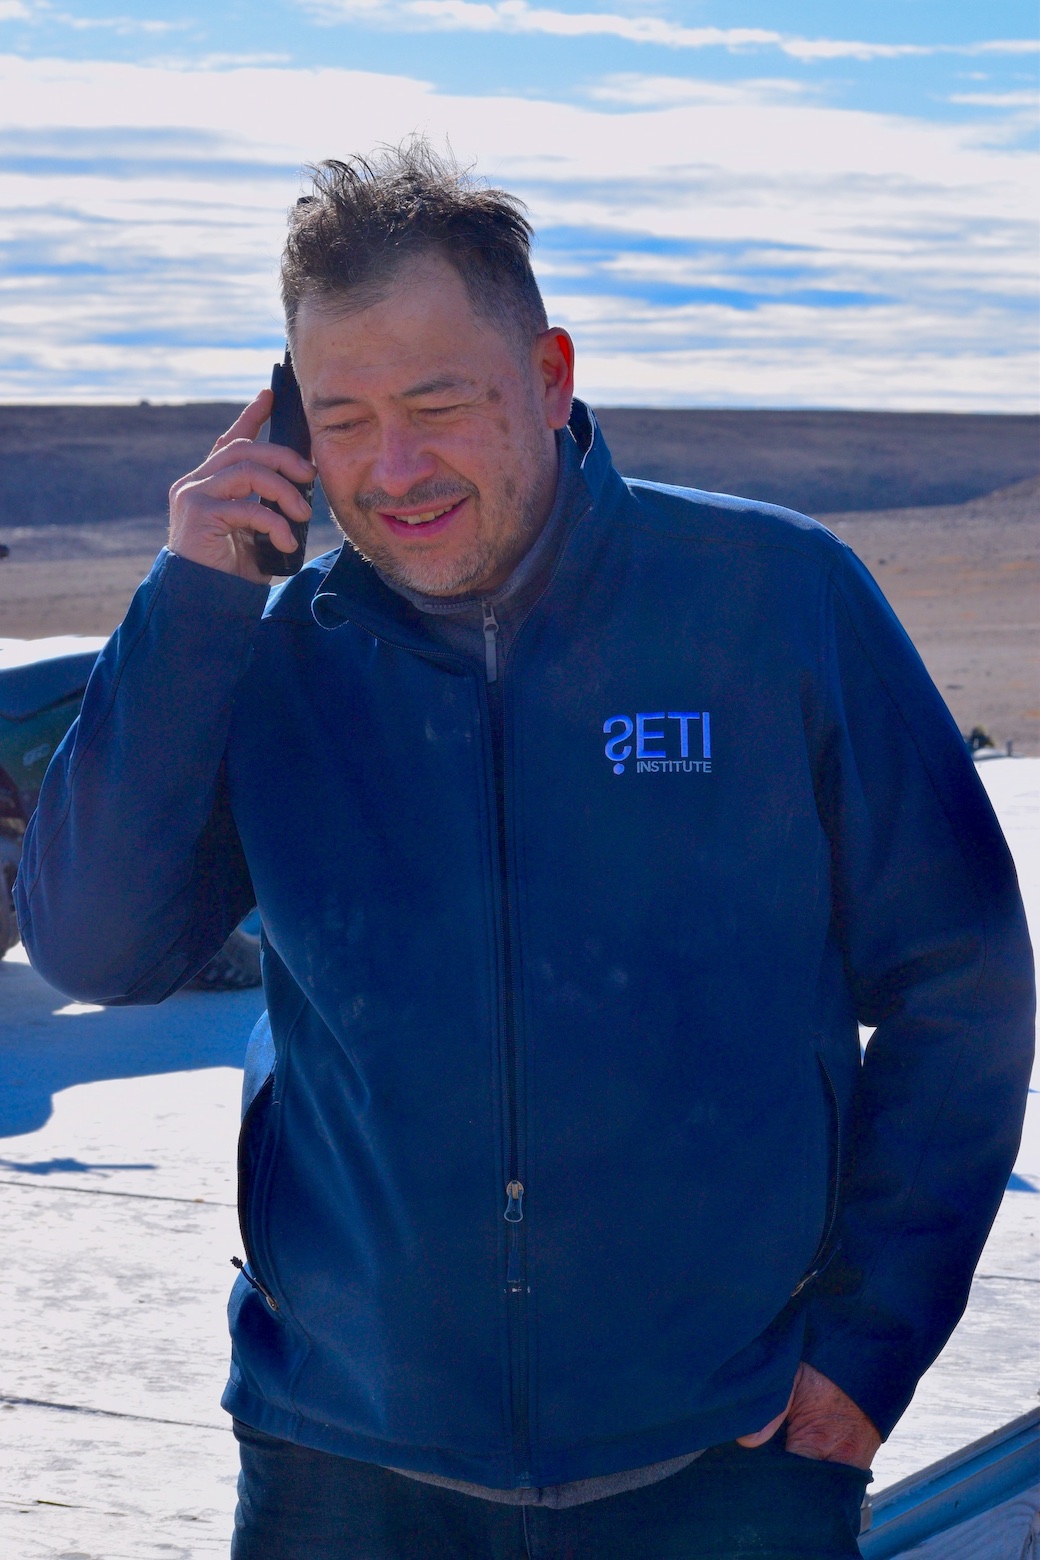 Pascal Lee in a blue suit talking on a satellite phone.